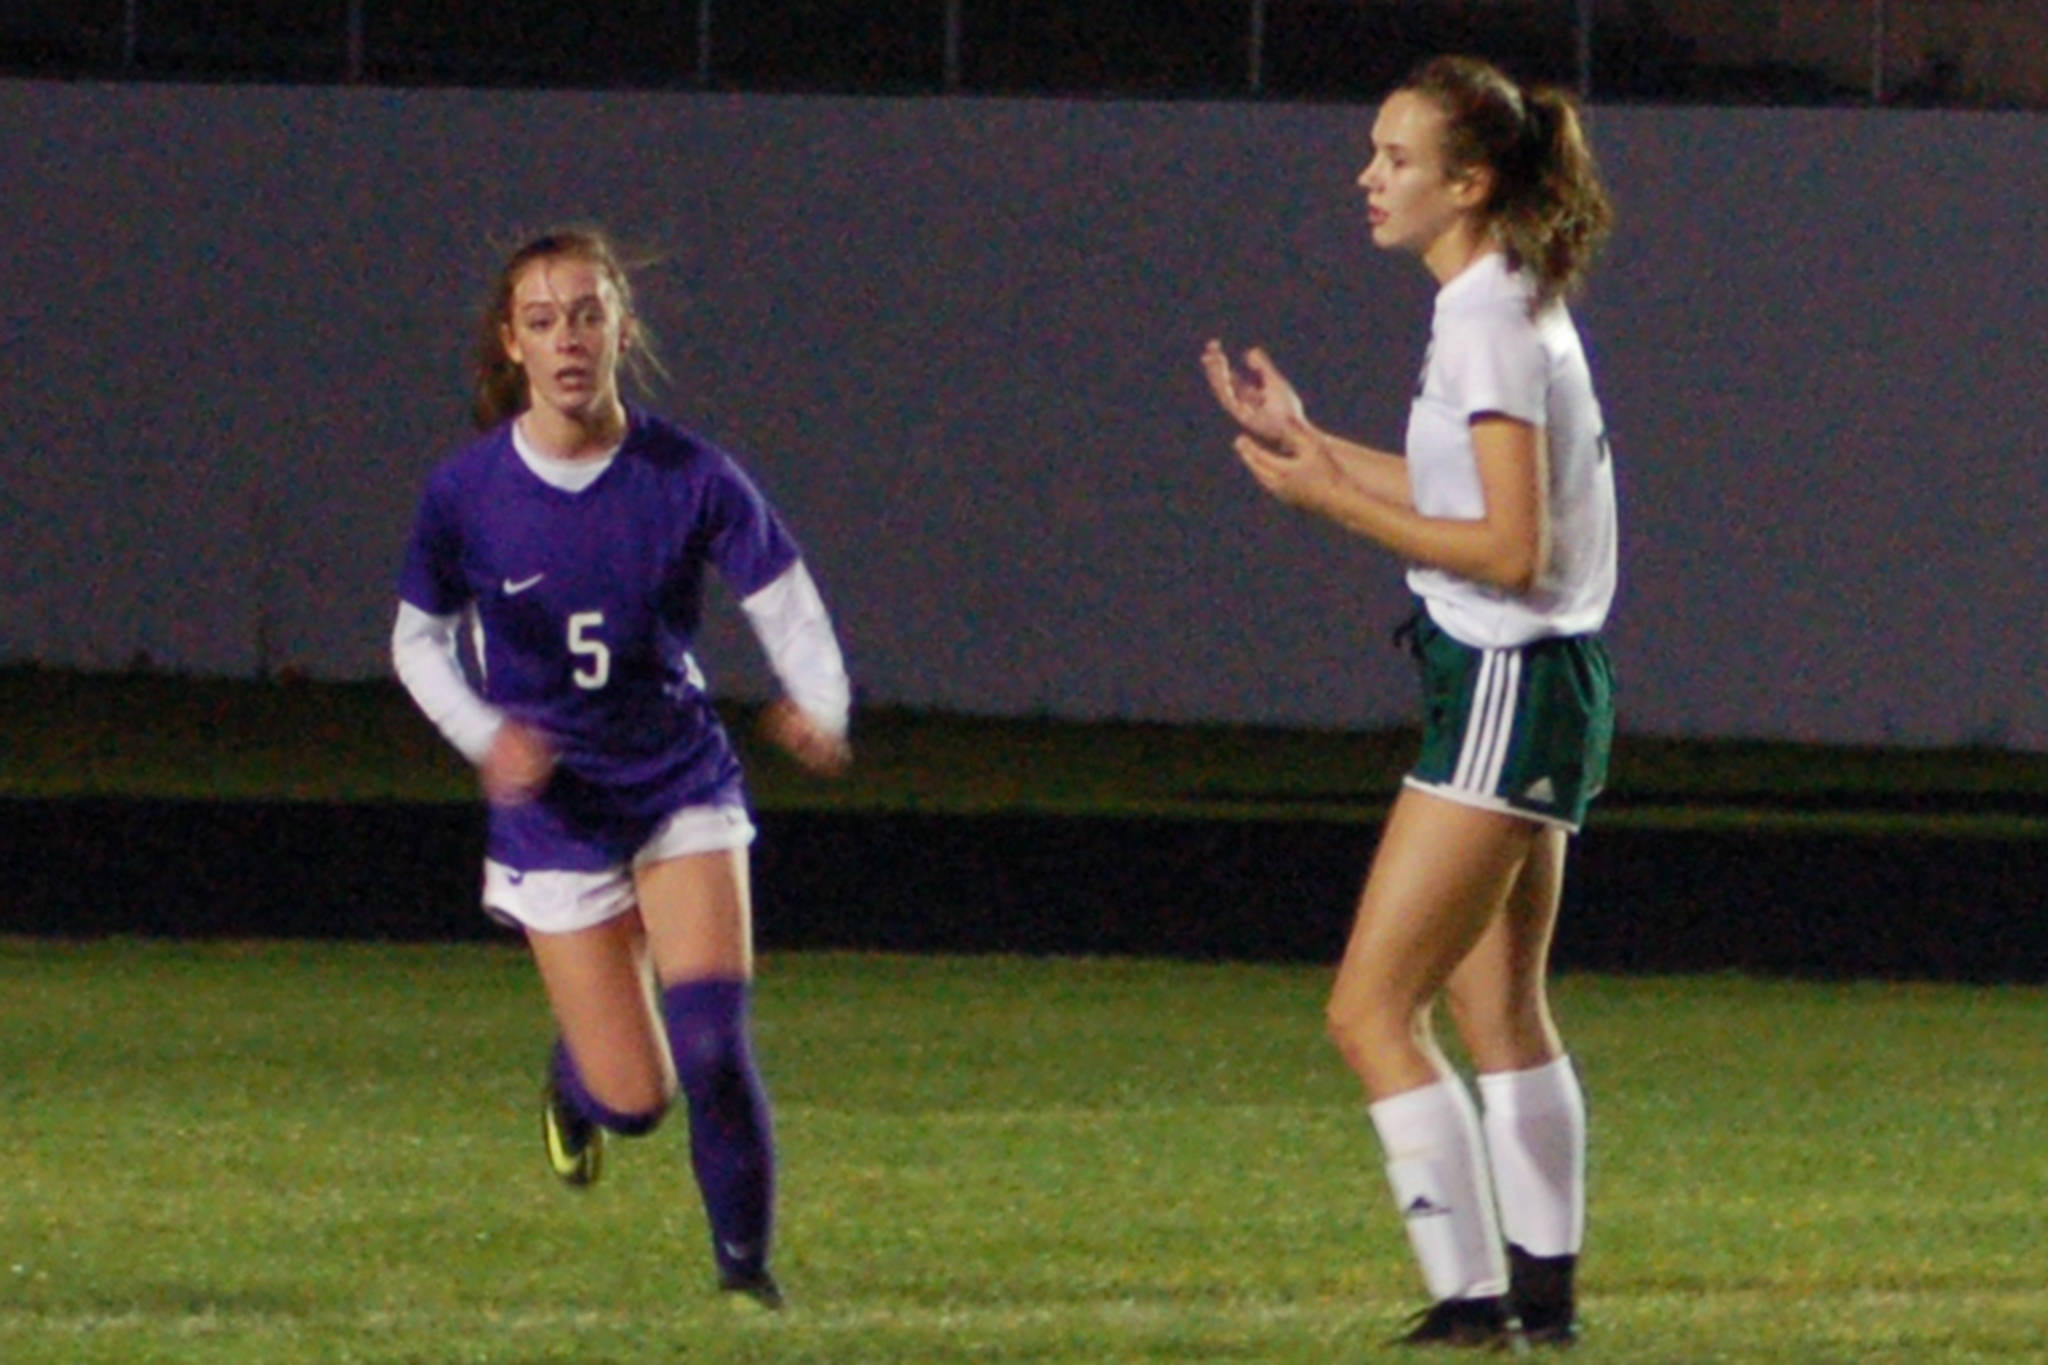 Port Angeles Roughriders forward Hannah Reetz (right) shows frustration after Mary McAleer (left, 5) clears a pass intended for her in front of the Sequim Wolves goal on Oct. 8. Reetz and star forward Millie Long struggled for quality service into the final third because of the Wolves’ game plan in their 2-1 shootout win. Sequim Gazette photo by Conor Dowley